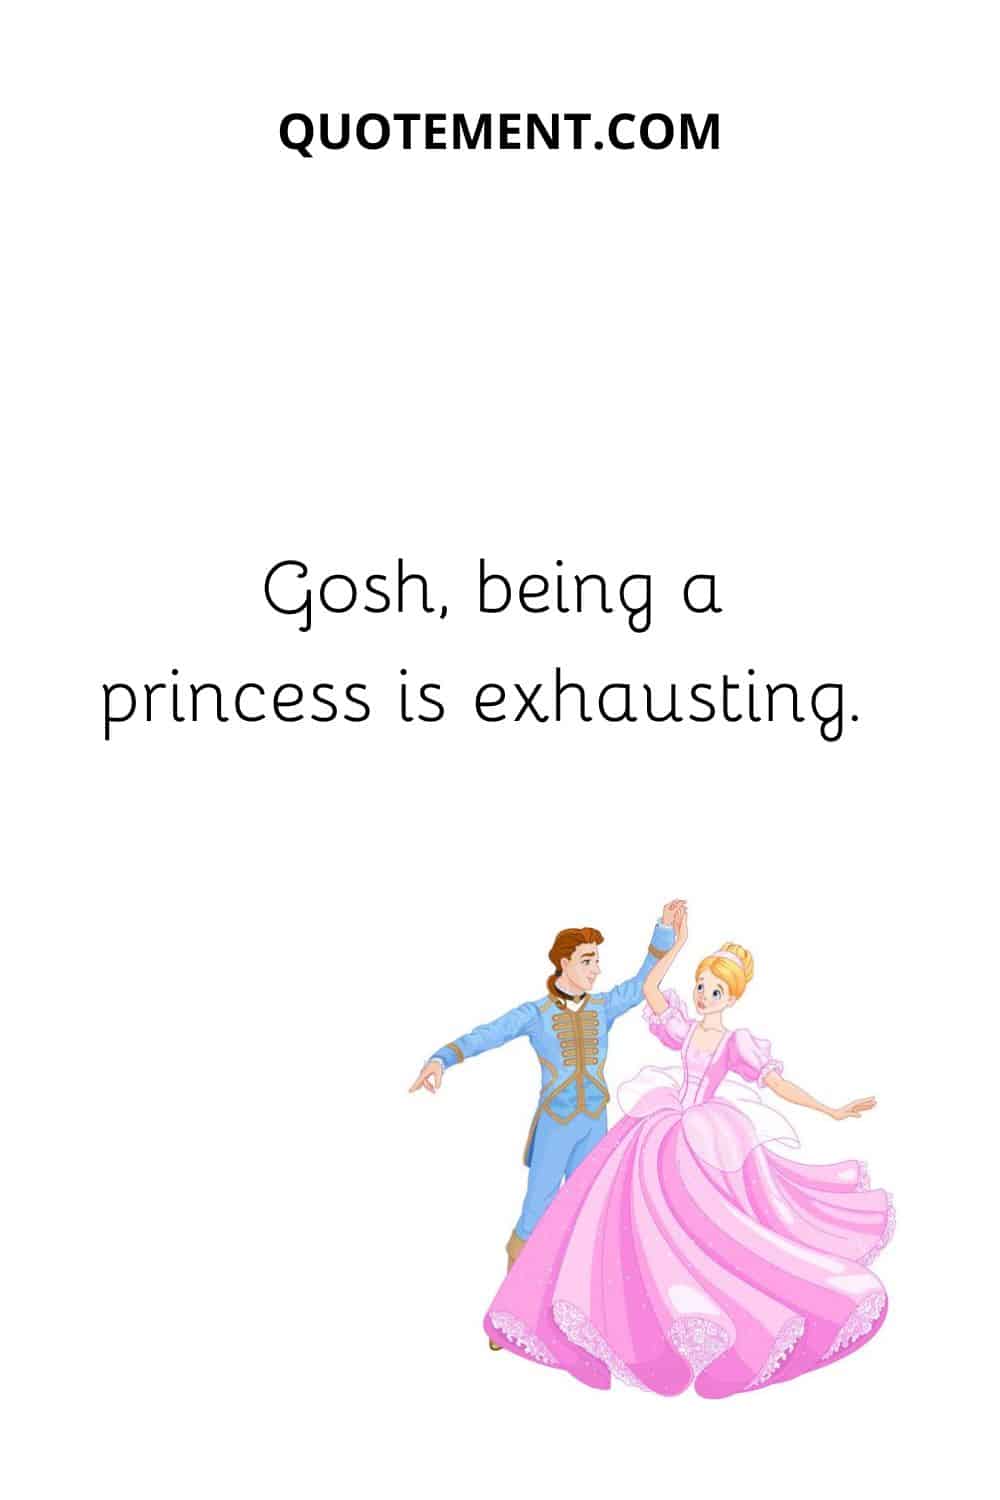 Gosh, being a princess is exhausting